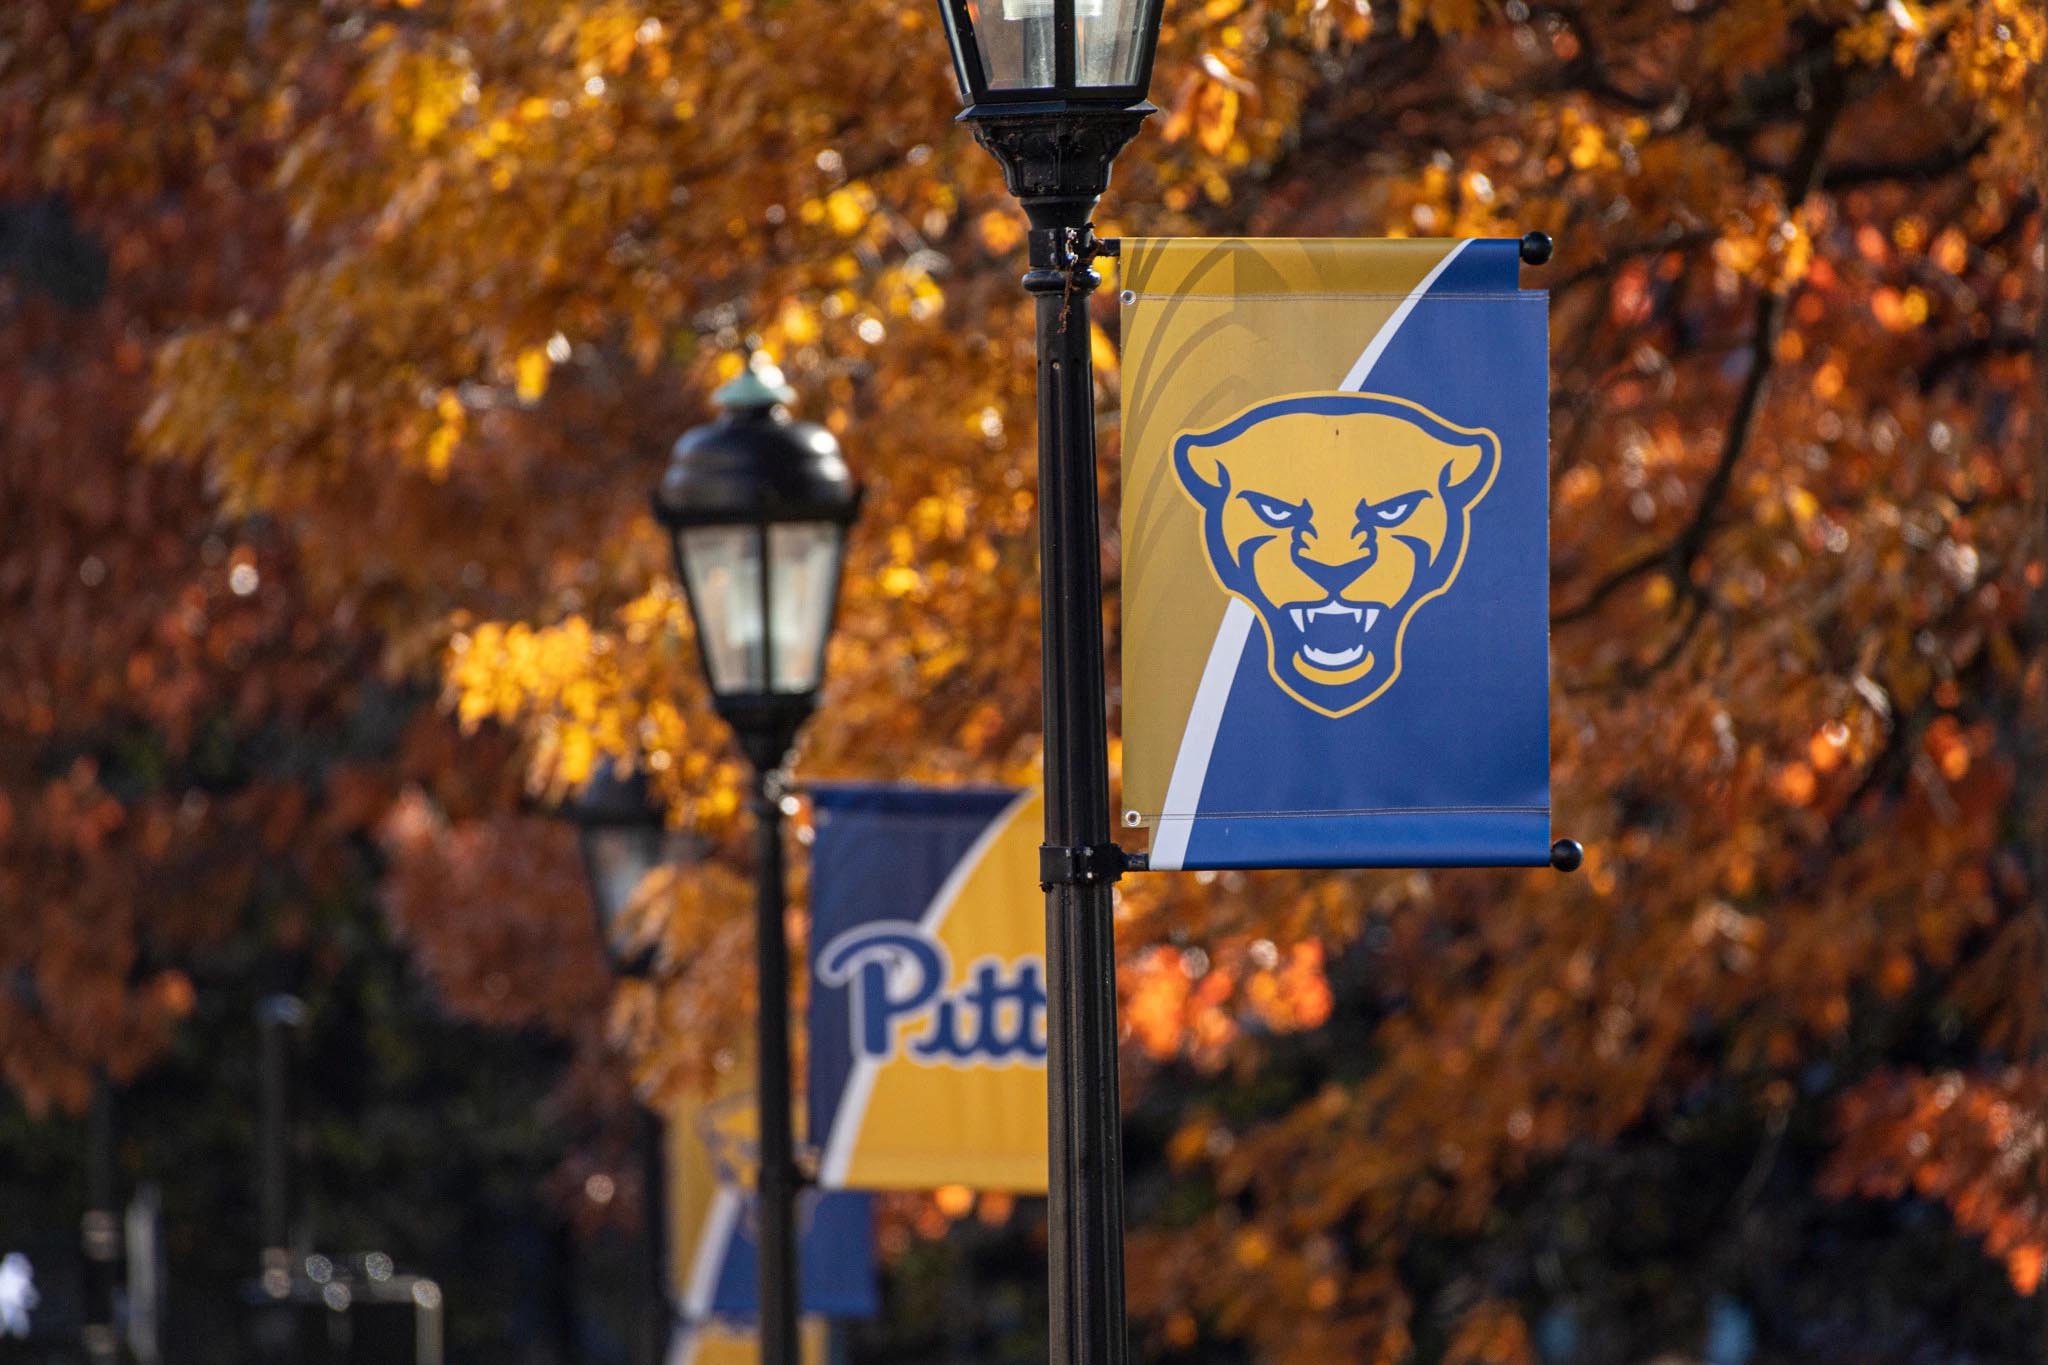 Pitt streetlight panther banners in the fall